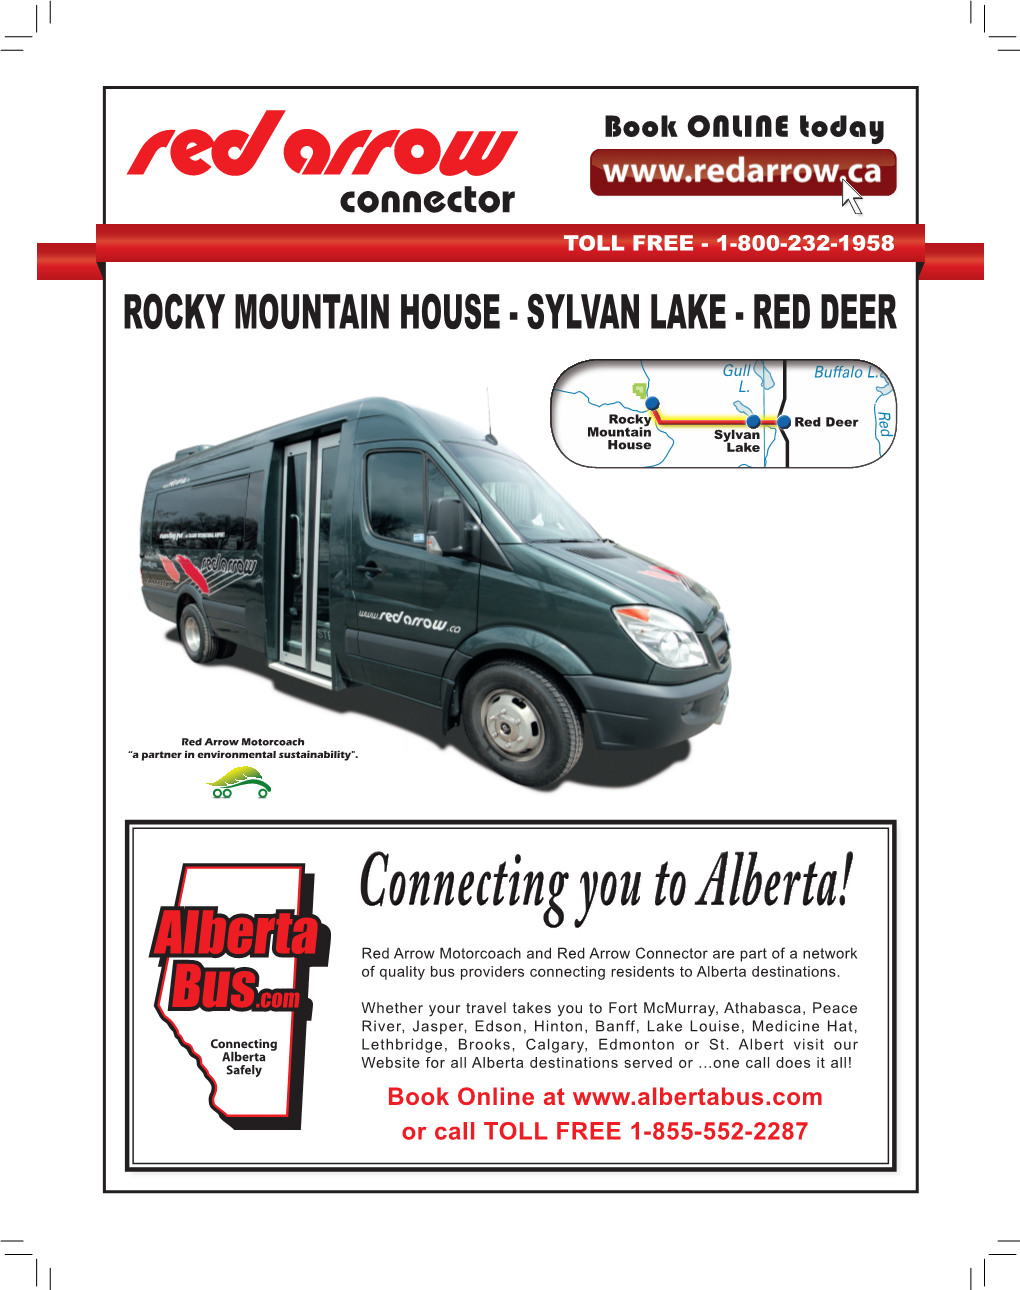 Connecting You to Alberta! Red Arrow Motorcoach and Red Arrow Connector Are Part of a Network of Quality Bus Providers Connecting Residents to Alberta Destinations